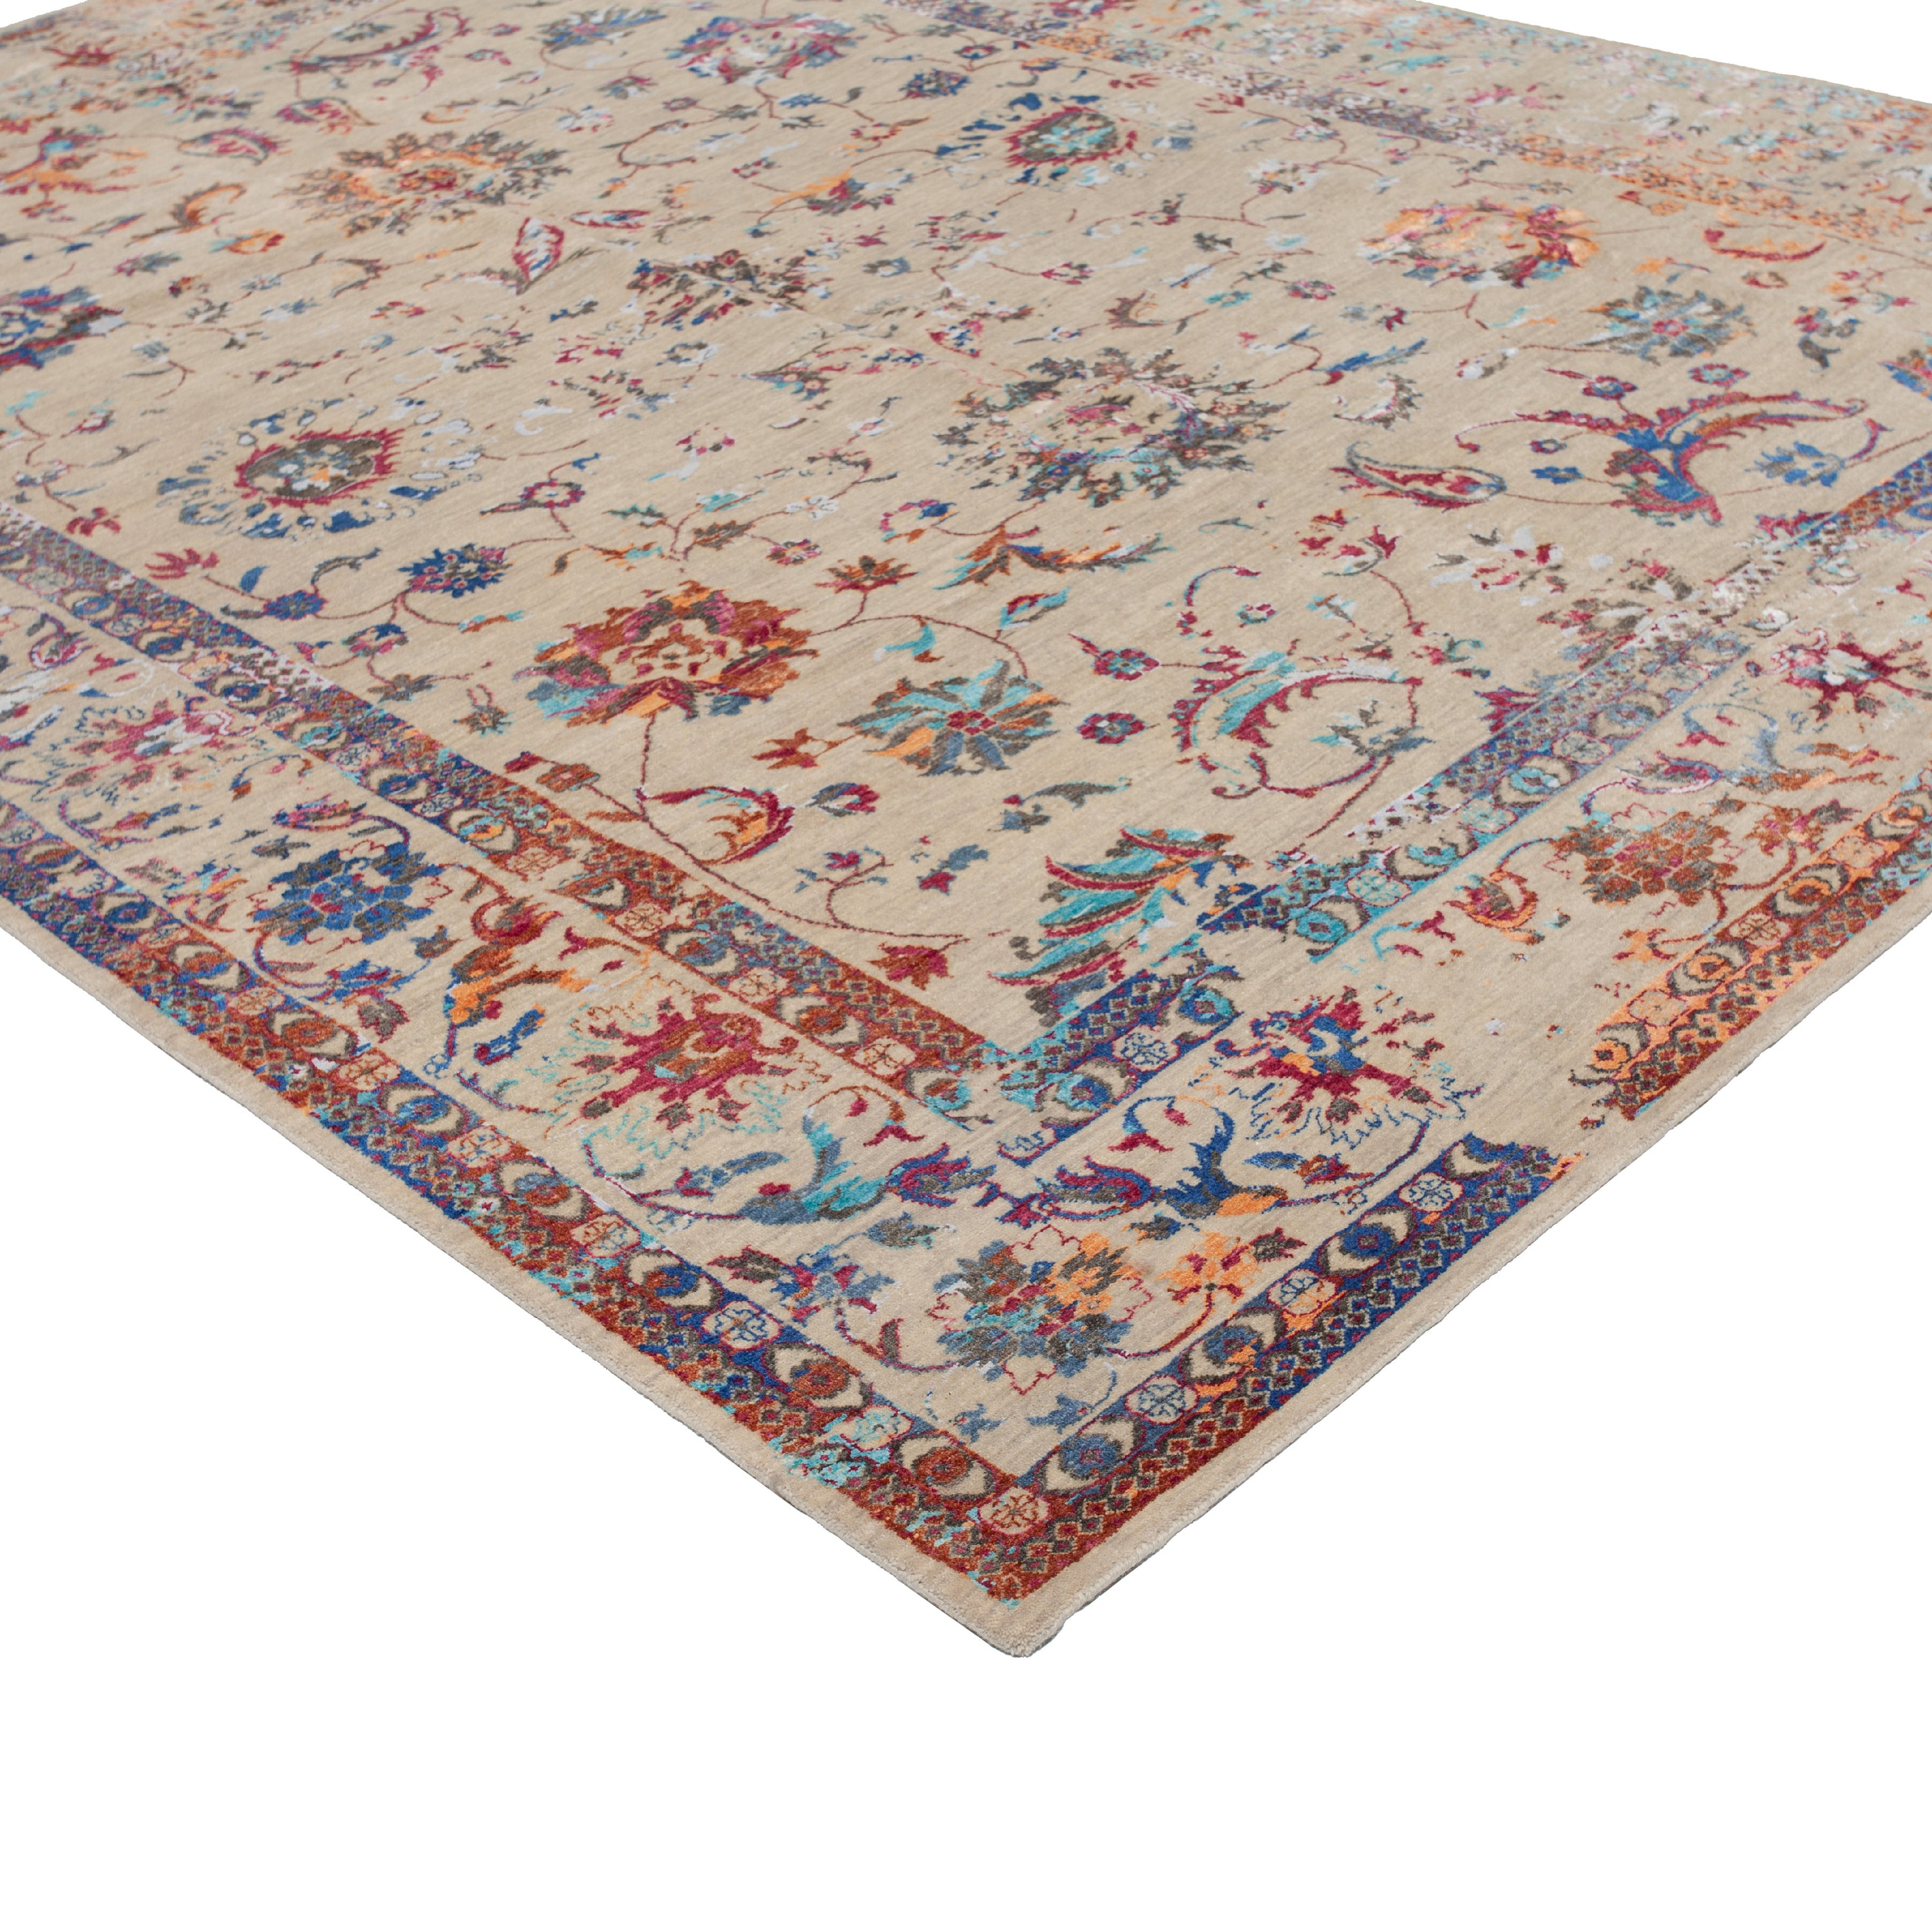 Hand-knotted Wool Rug - 12'2" x 9'1" Default Title